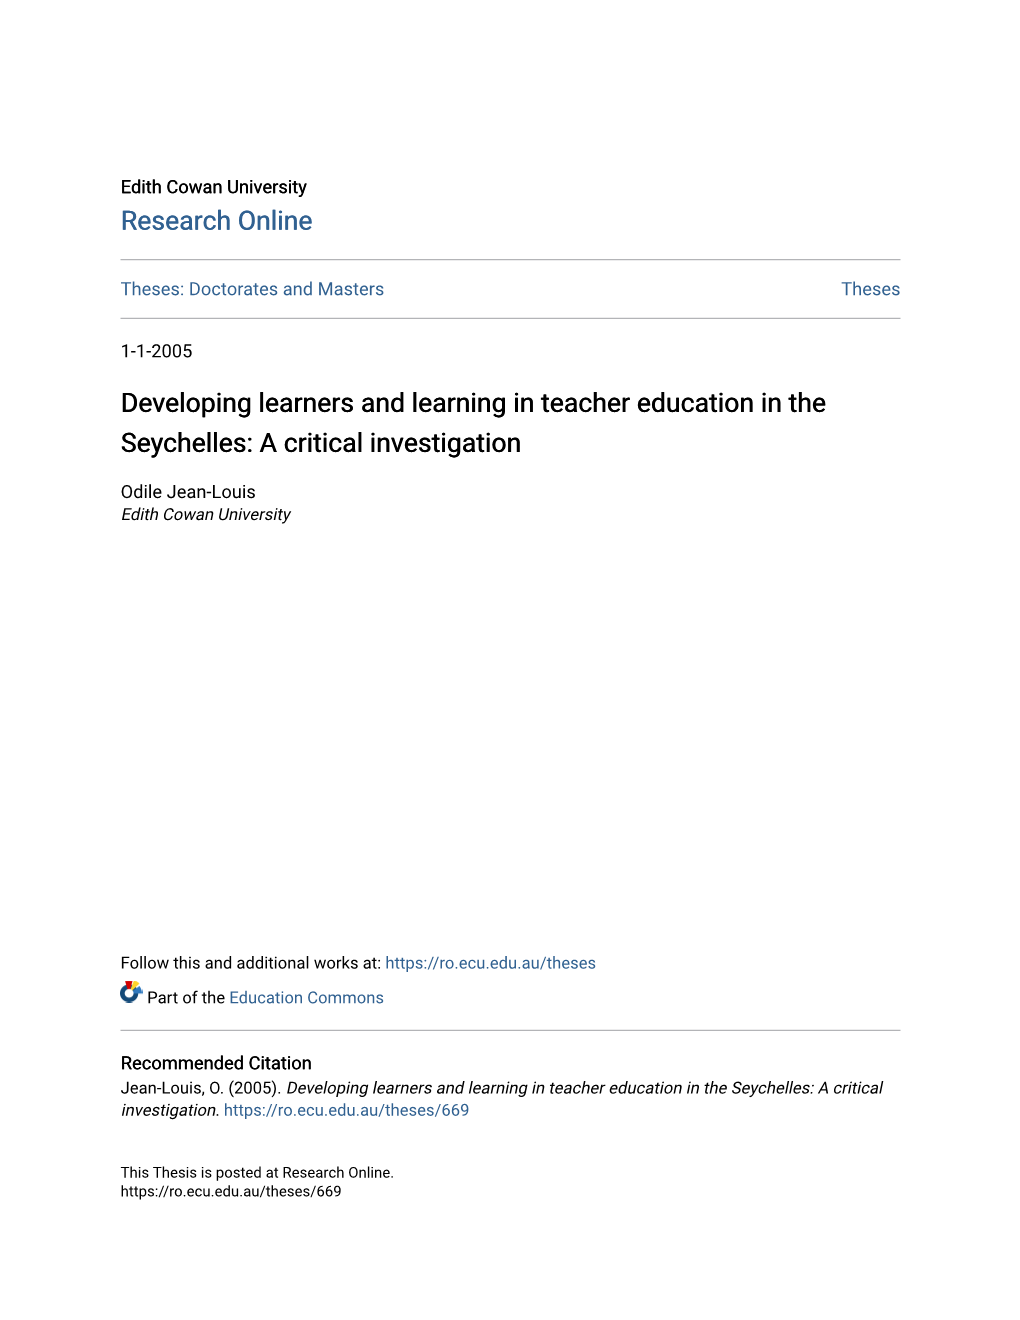 Developing Learners and Learning in Teacher Education in the Seychelles: a Critical Investigation